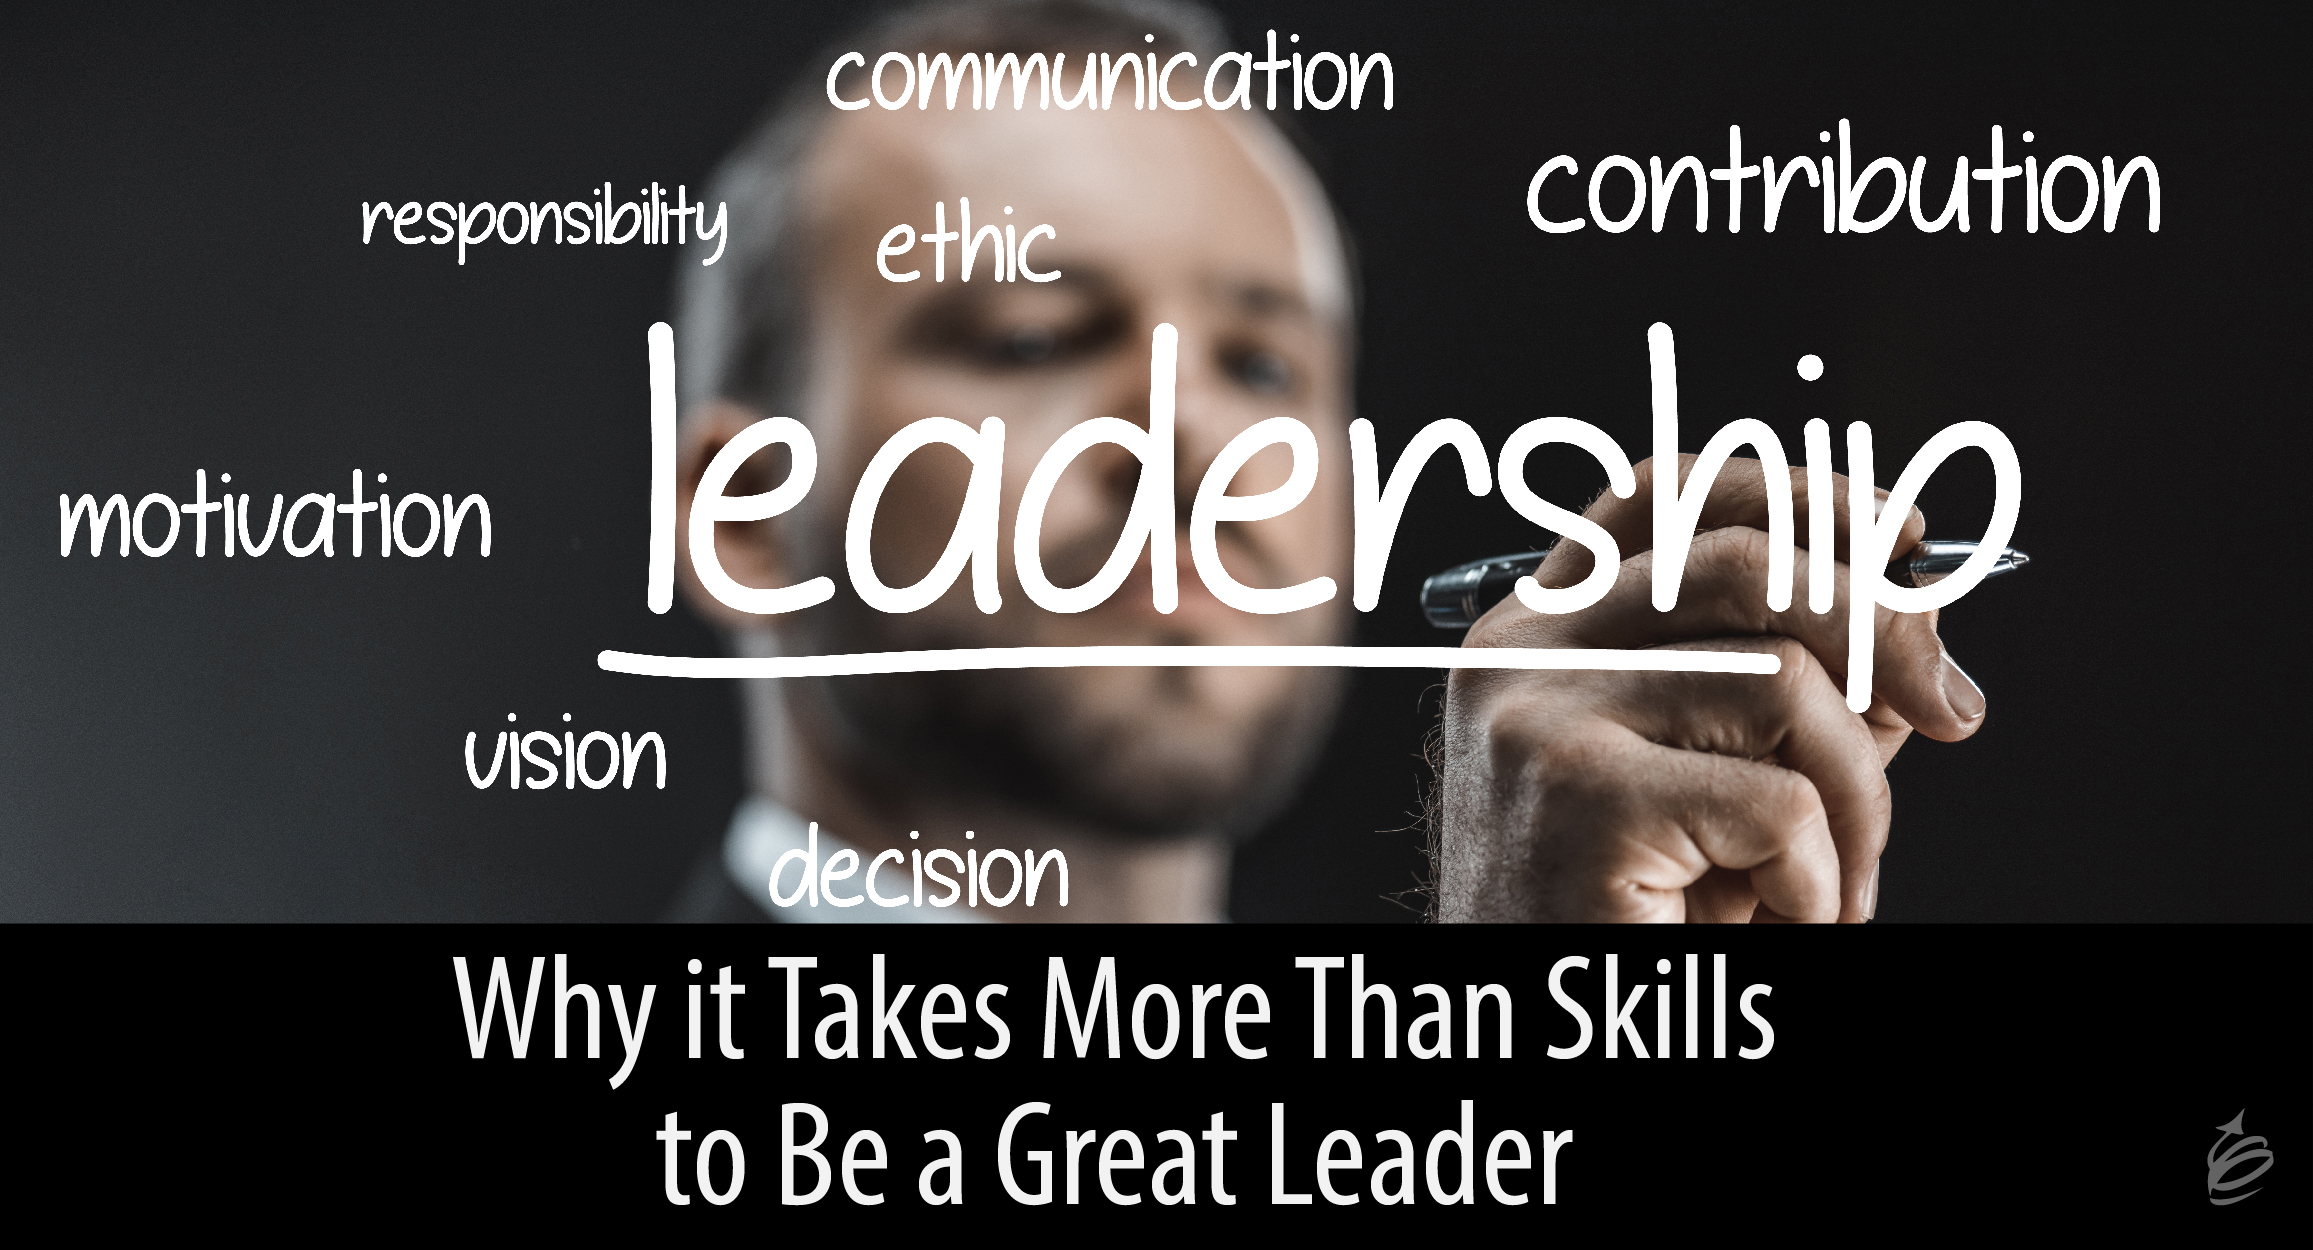 Why It Takes More Than Skills to Be a Great Leader